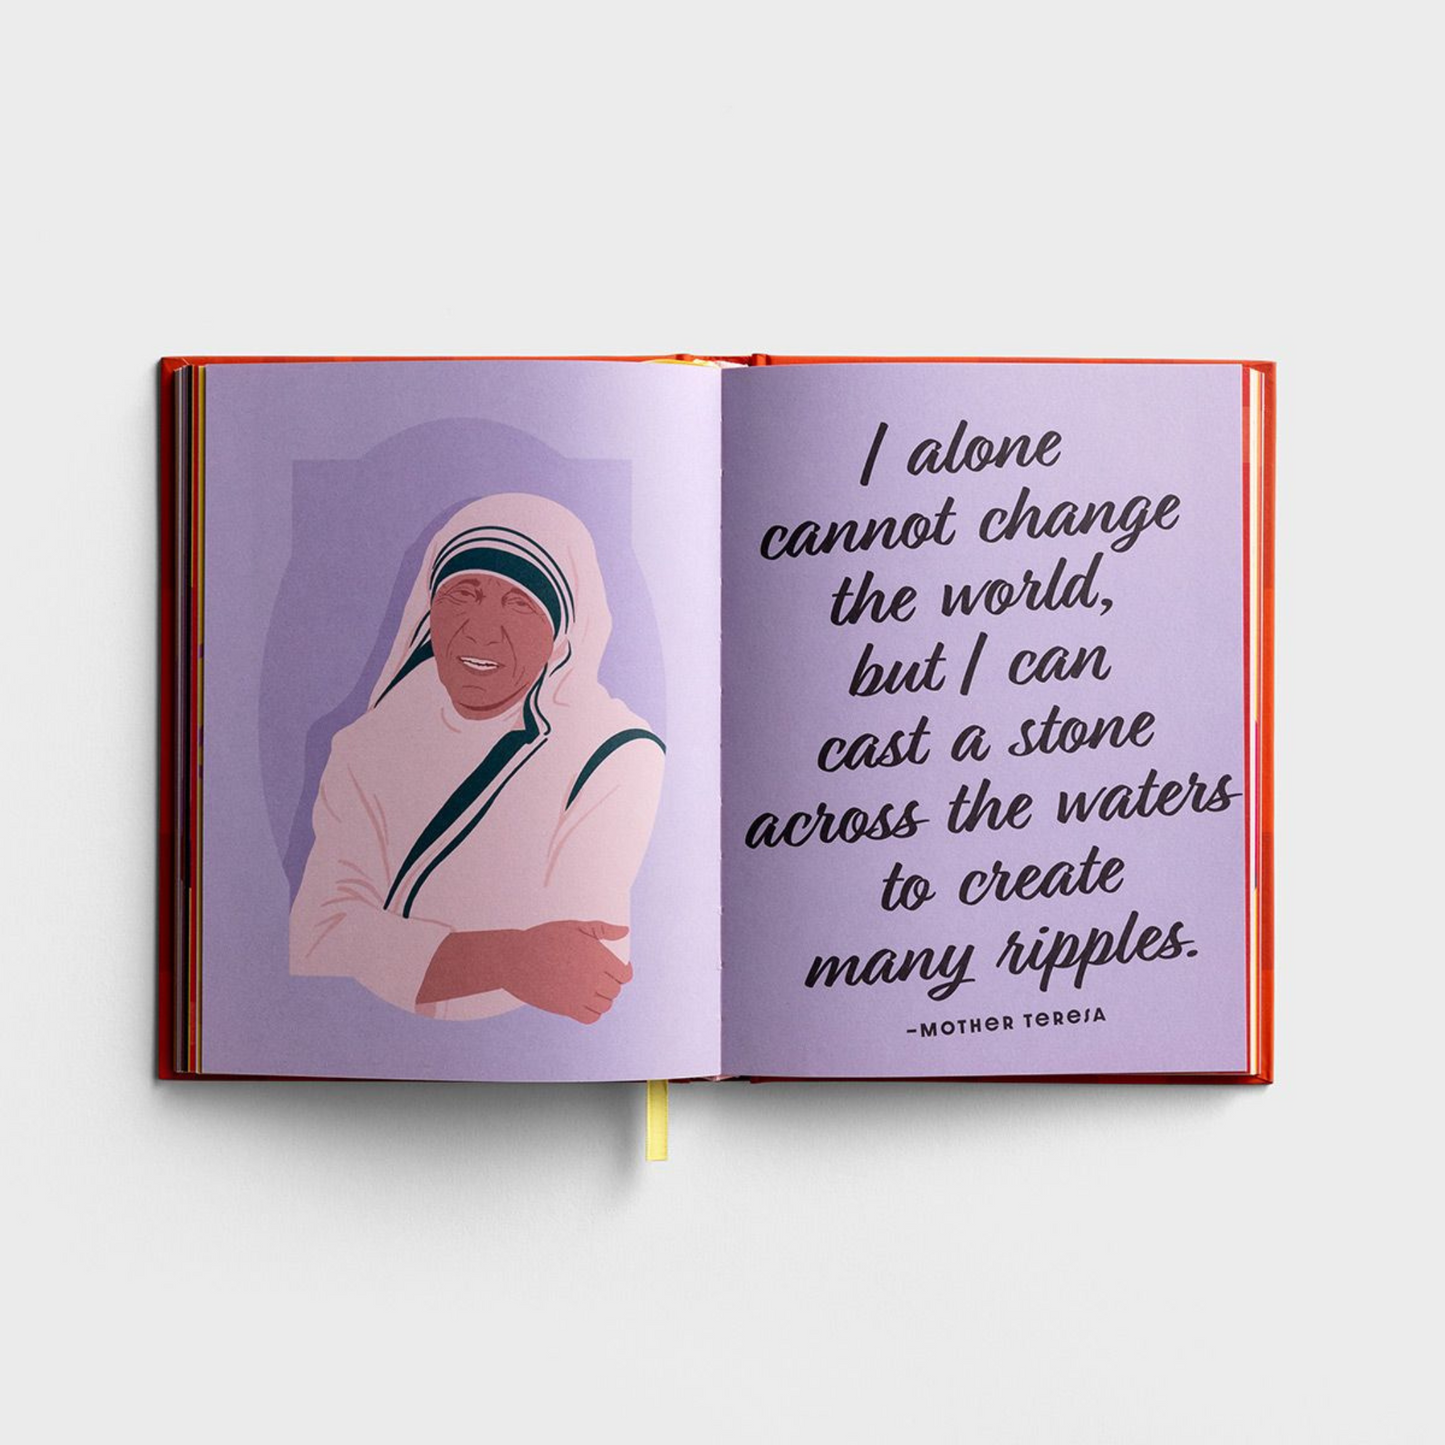 55 Devotions Inspired by Fearless Christian Women in History